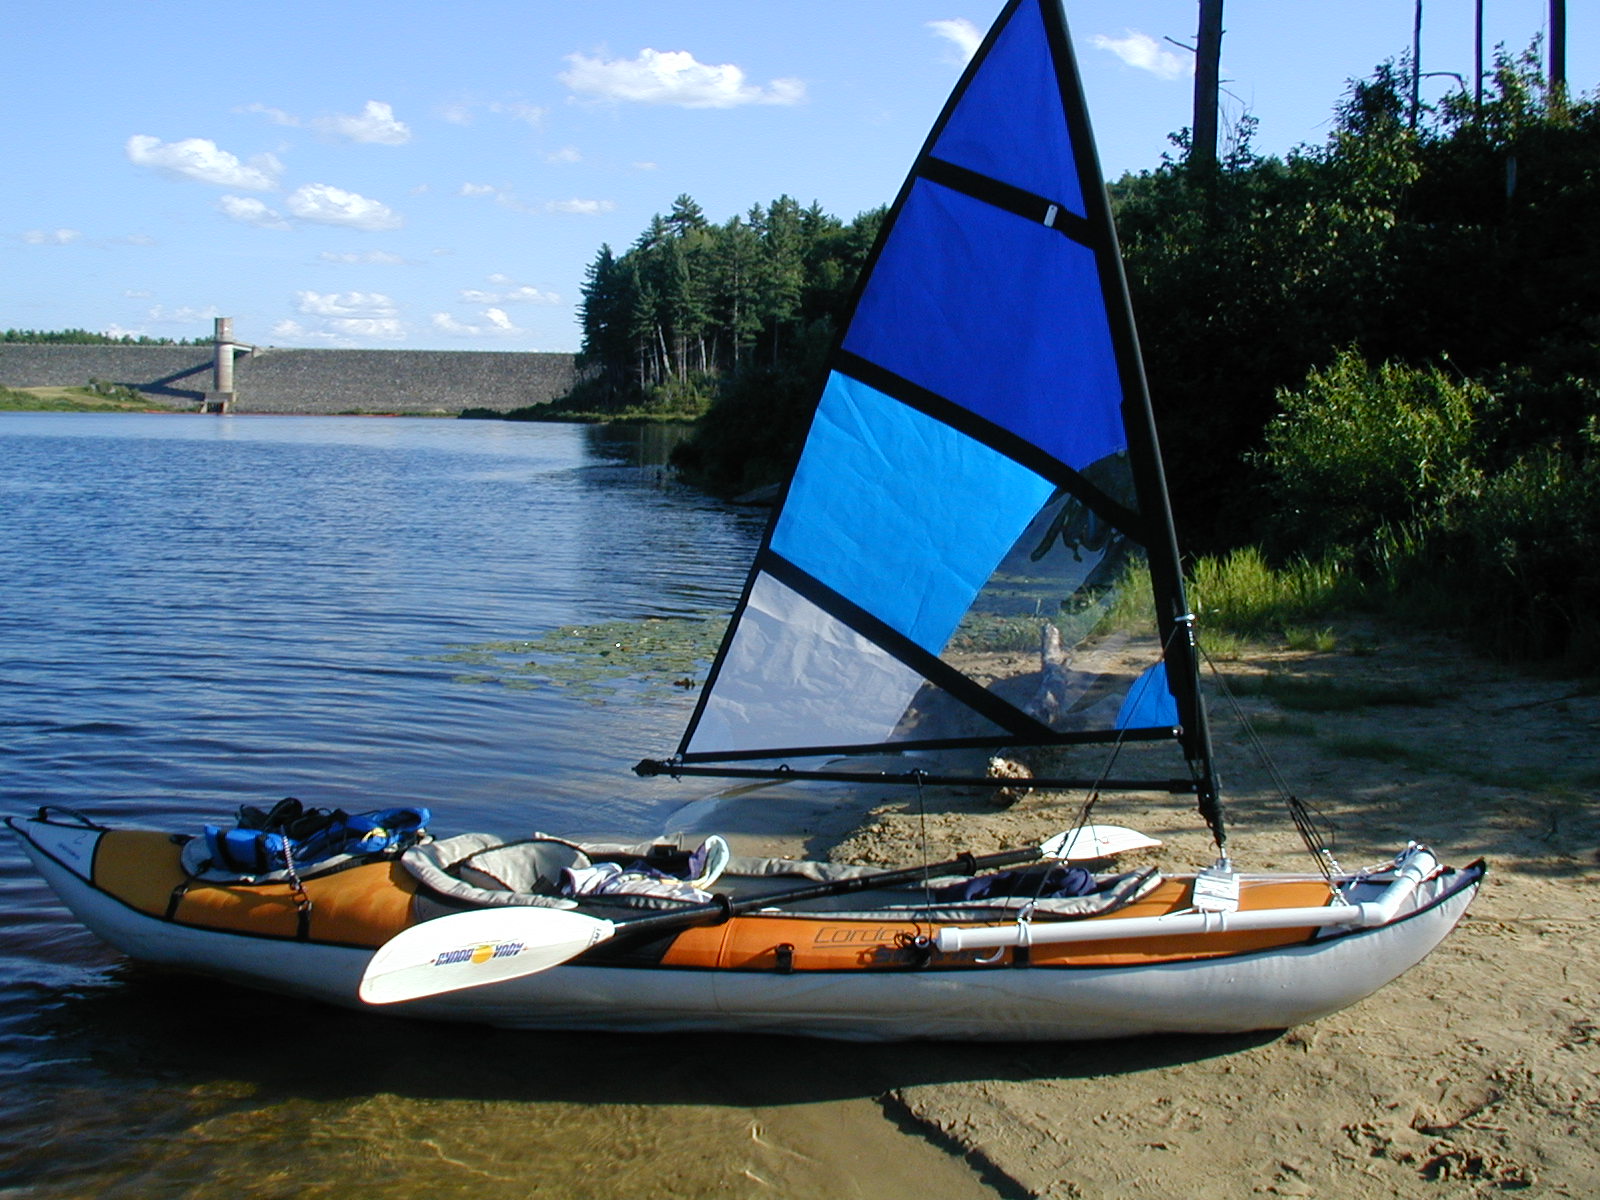 Will a Falcon Sail work on a inflatable canoe or kayak?